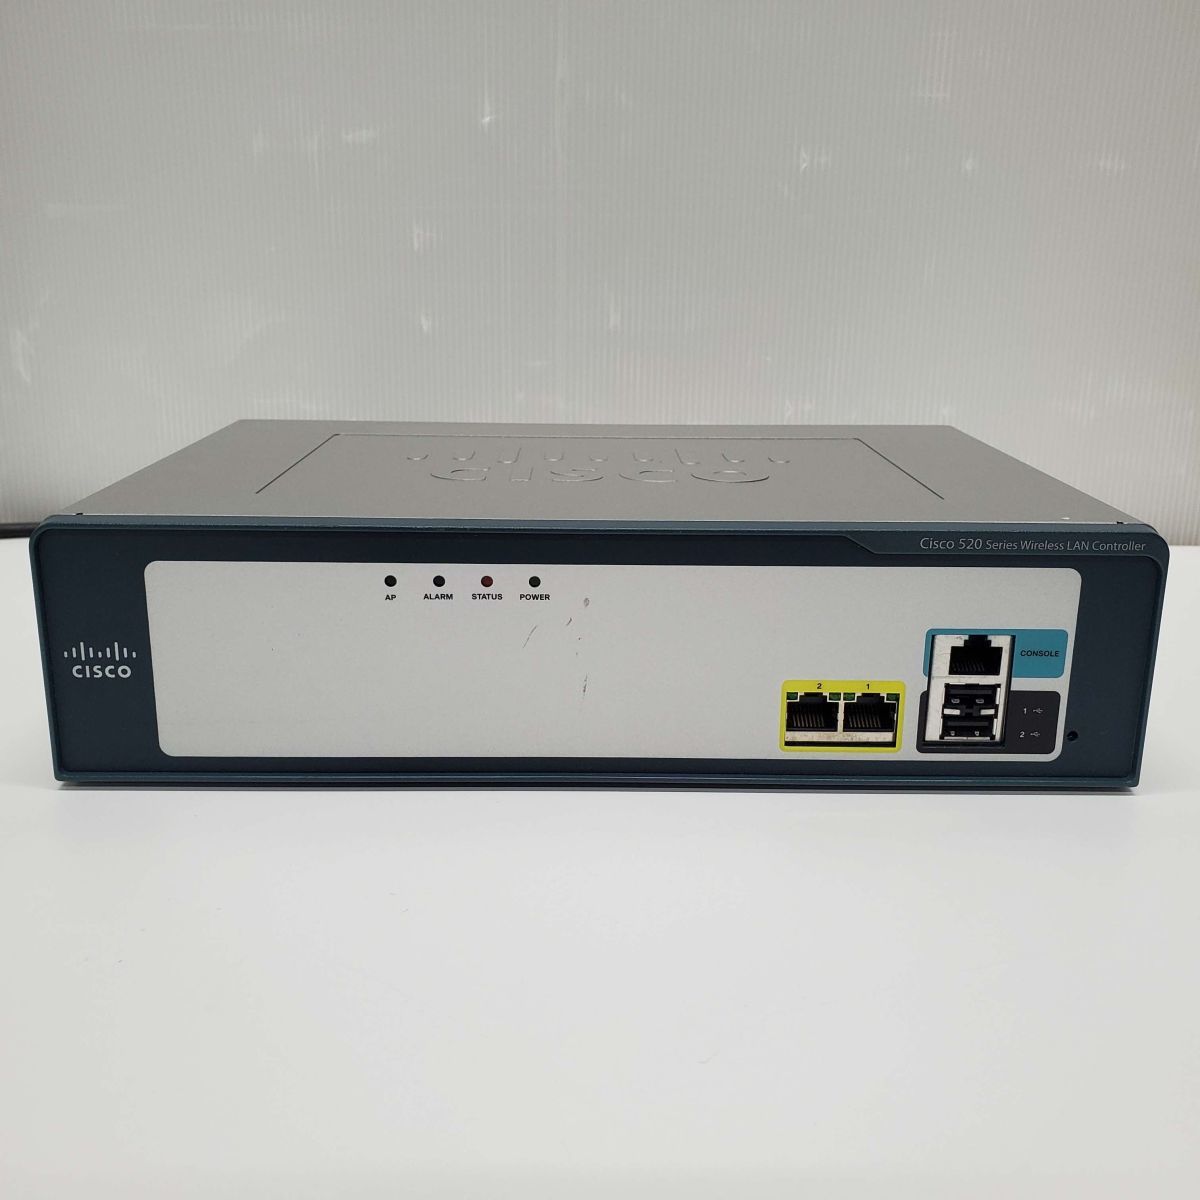 @T0696[ electrification only has confirmed ]Cisco 520 AIR-WLC-526-K9 WLC526 Mobility Express Controller wireless LAN AP controller 